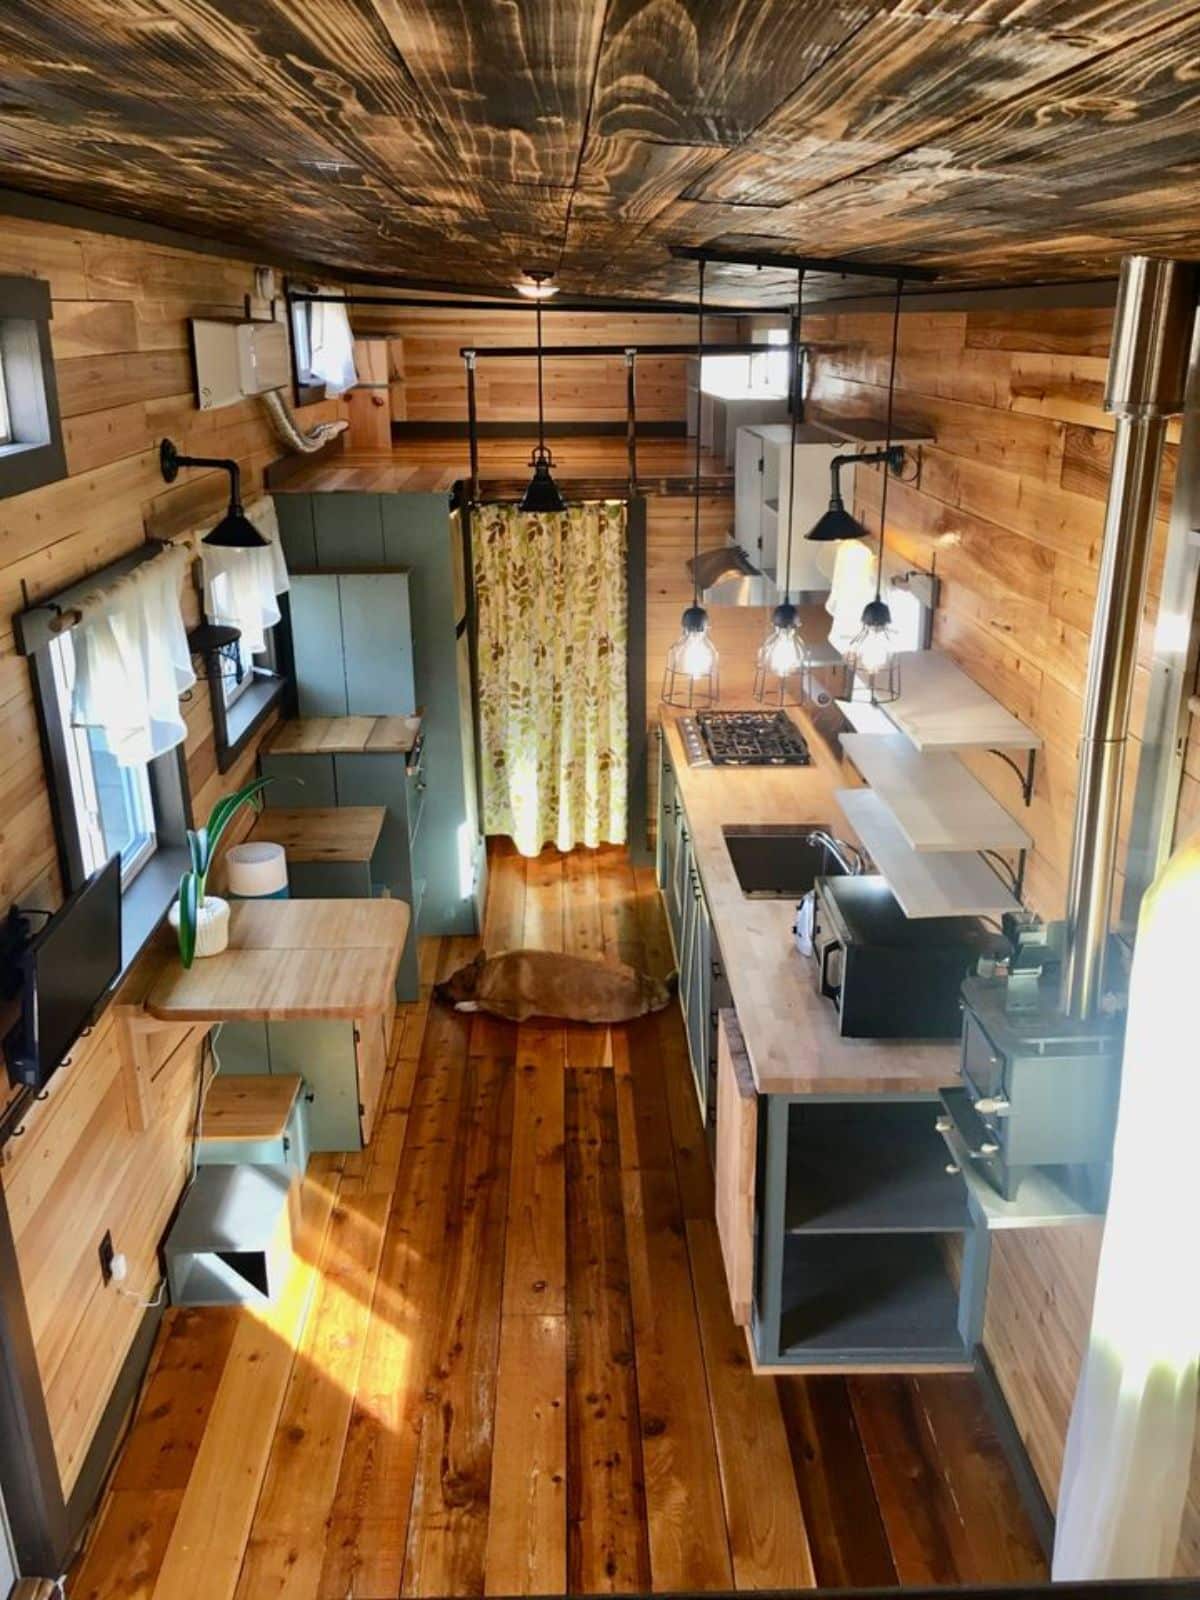 huge ceiling and wooden interiors of tiny home with two bedrooms